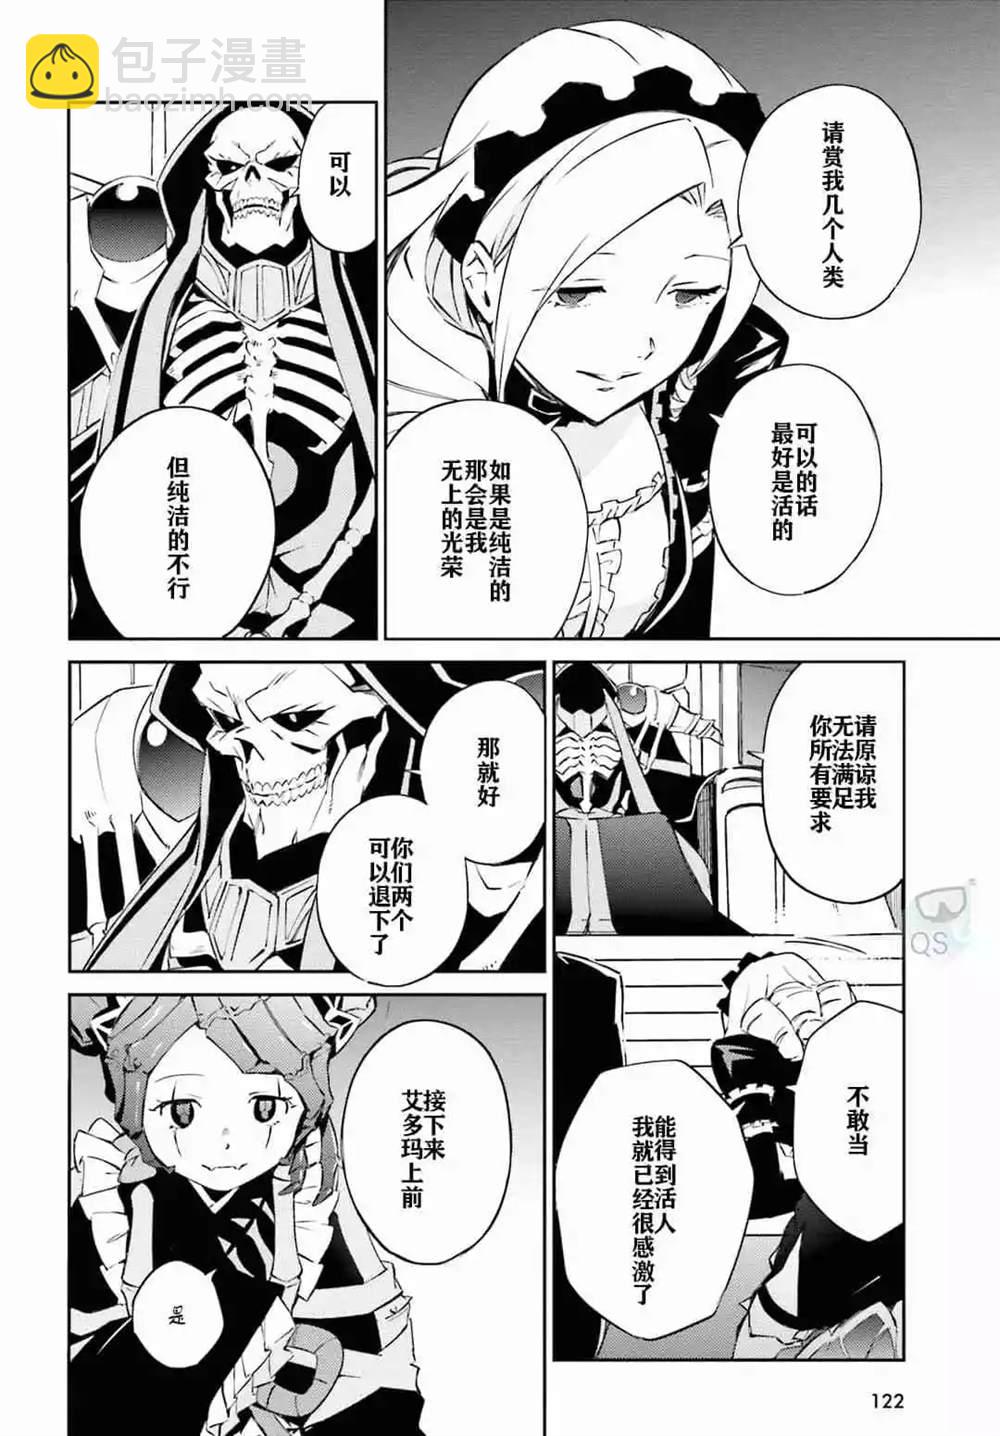 OVERLORD - 第53話 - 4